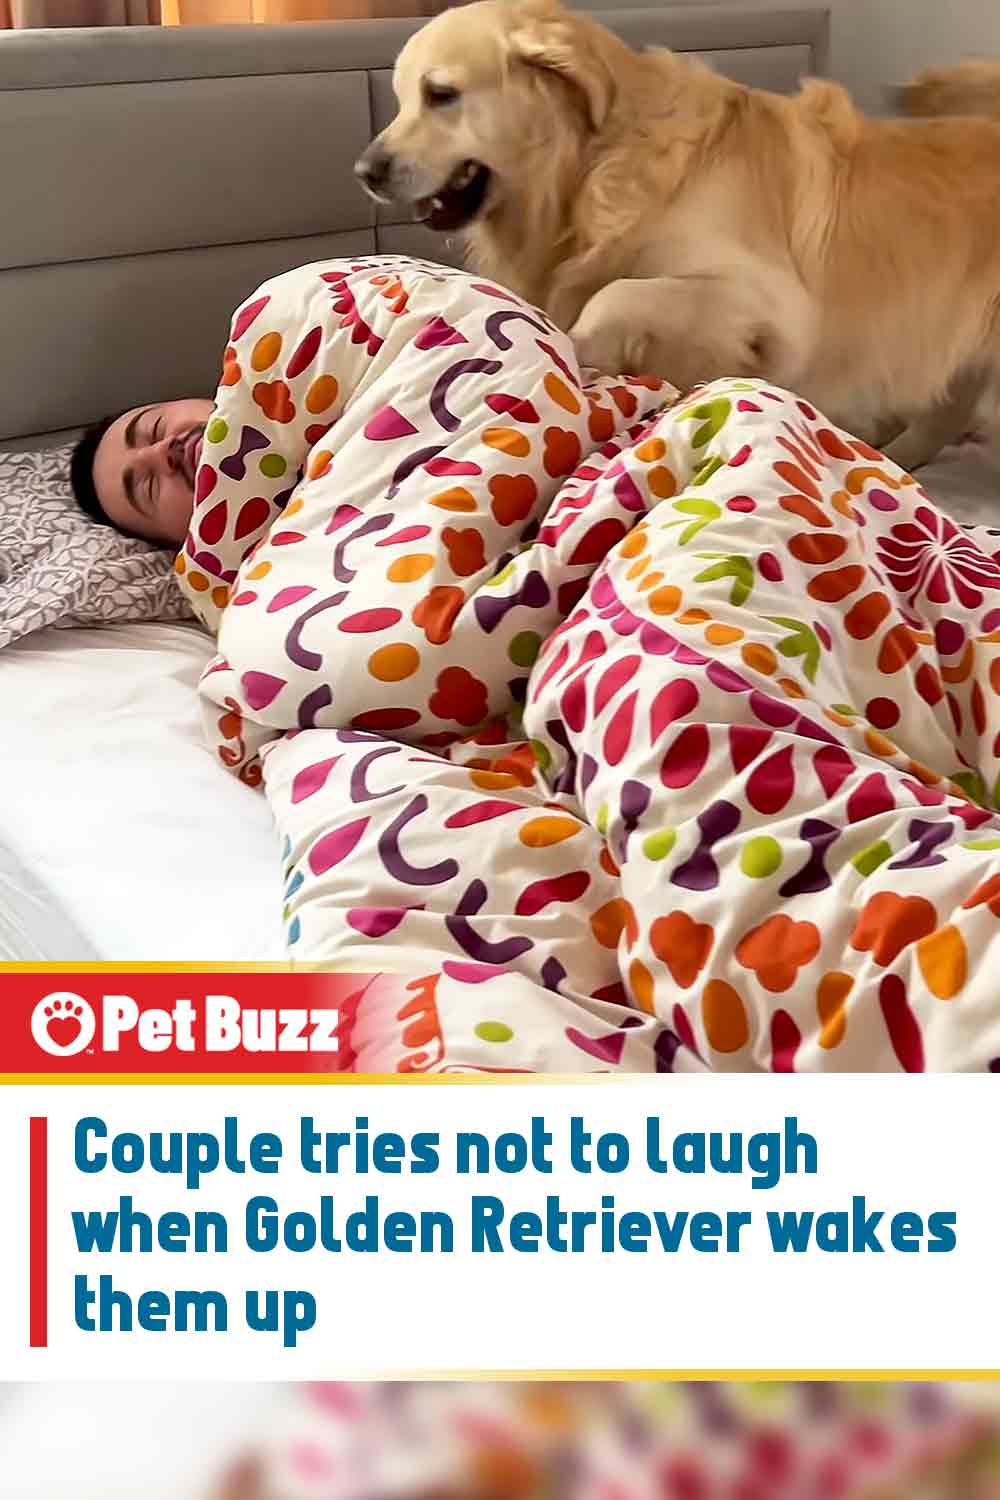 Couple tries not to laugh when Golden Retriever wakes them up